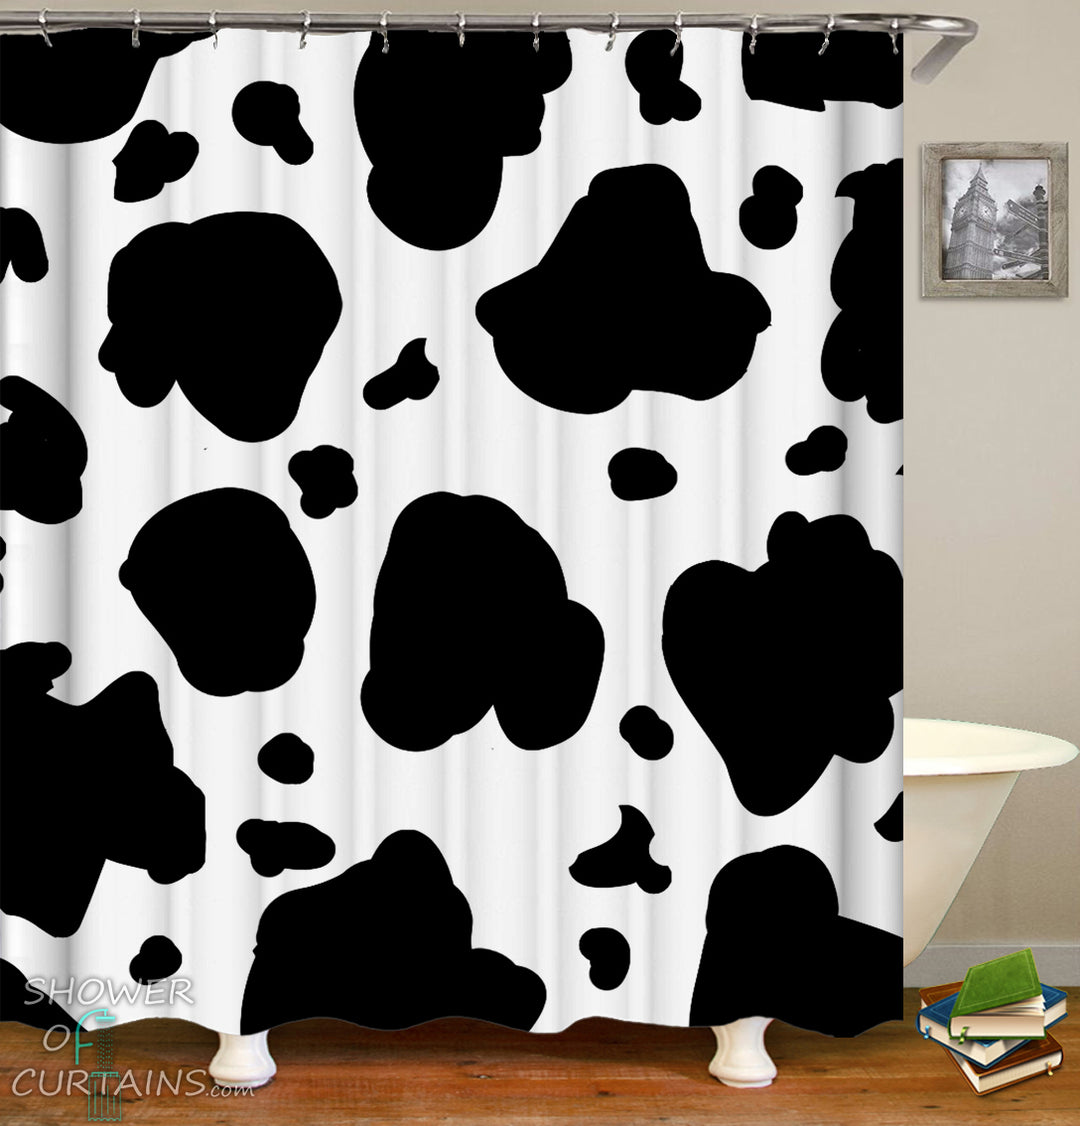 Cow Skin Shower Curtain - Black and White Themed Bathroom